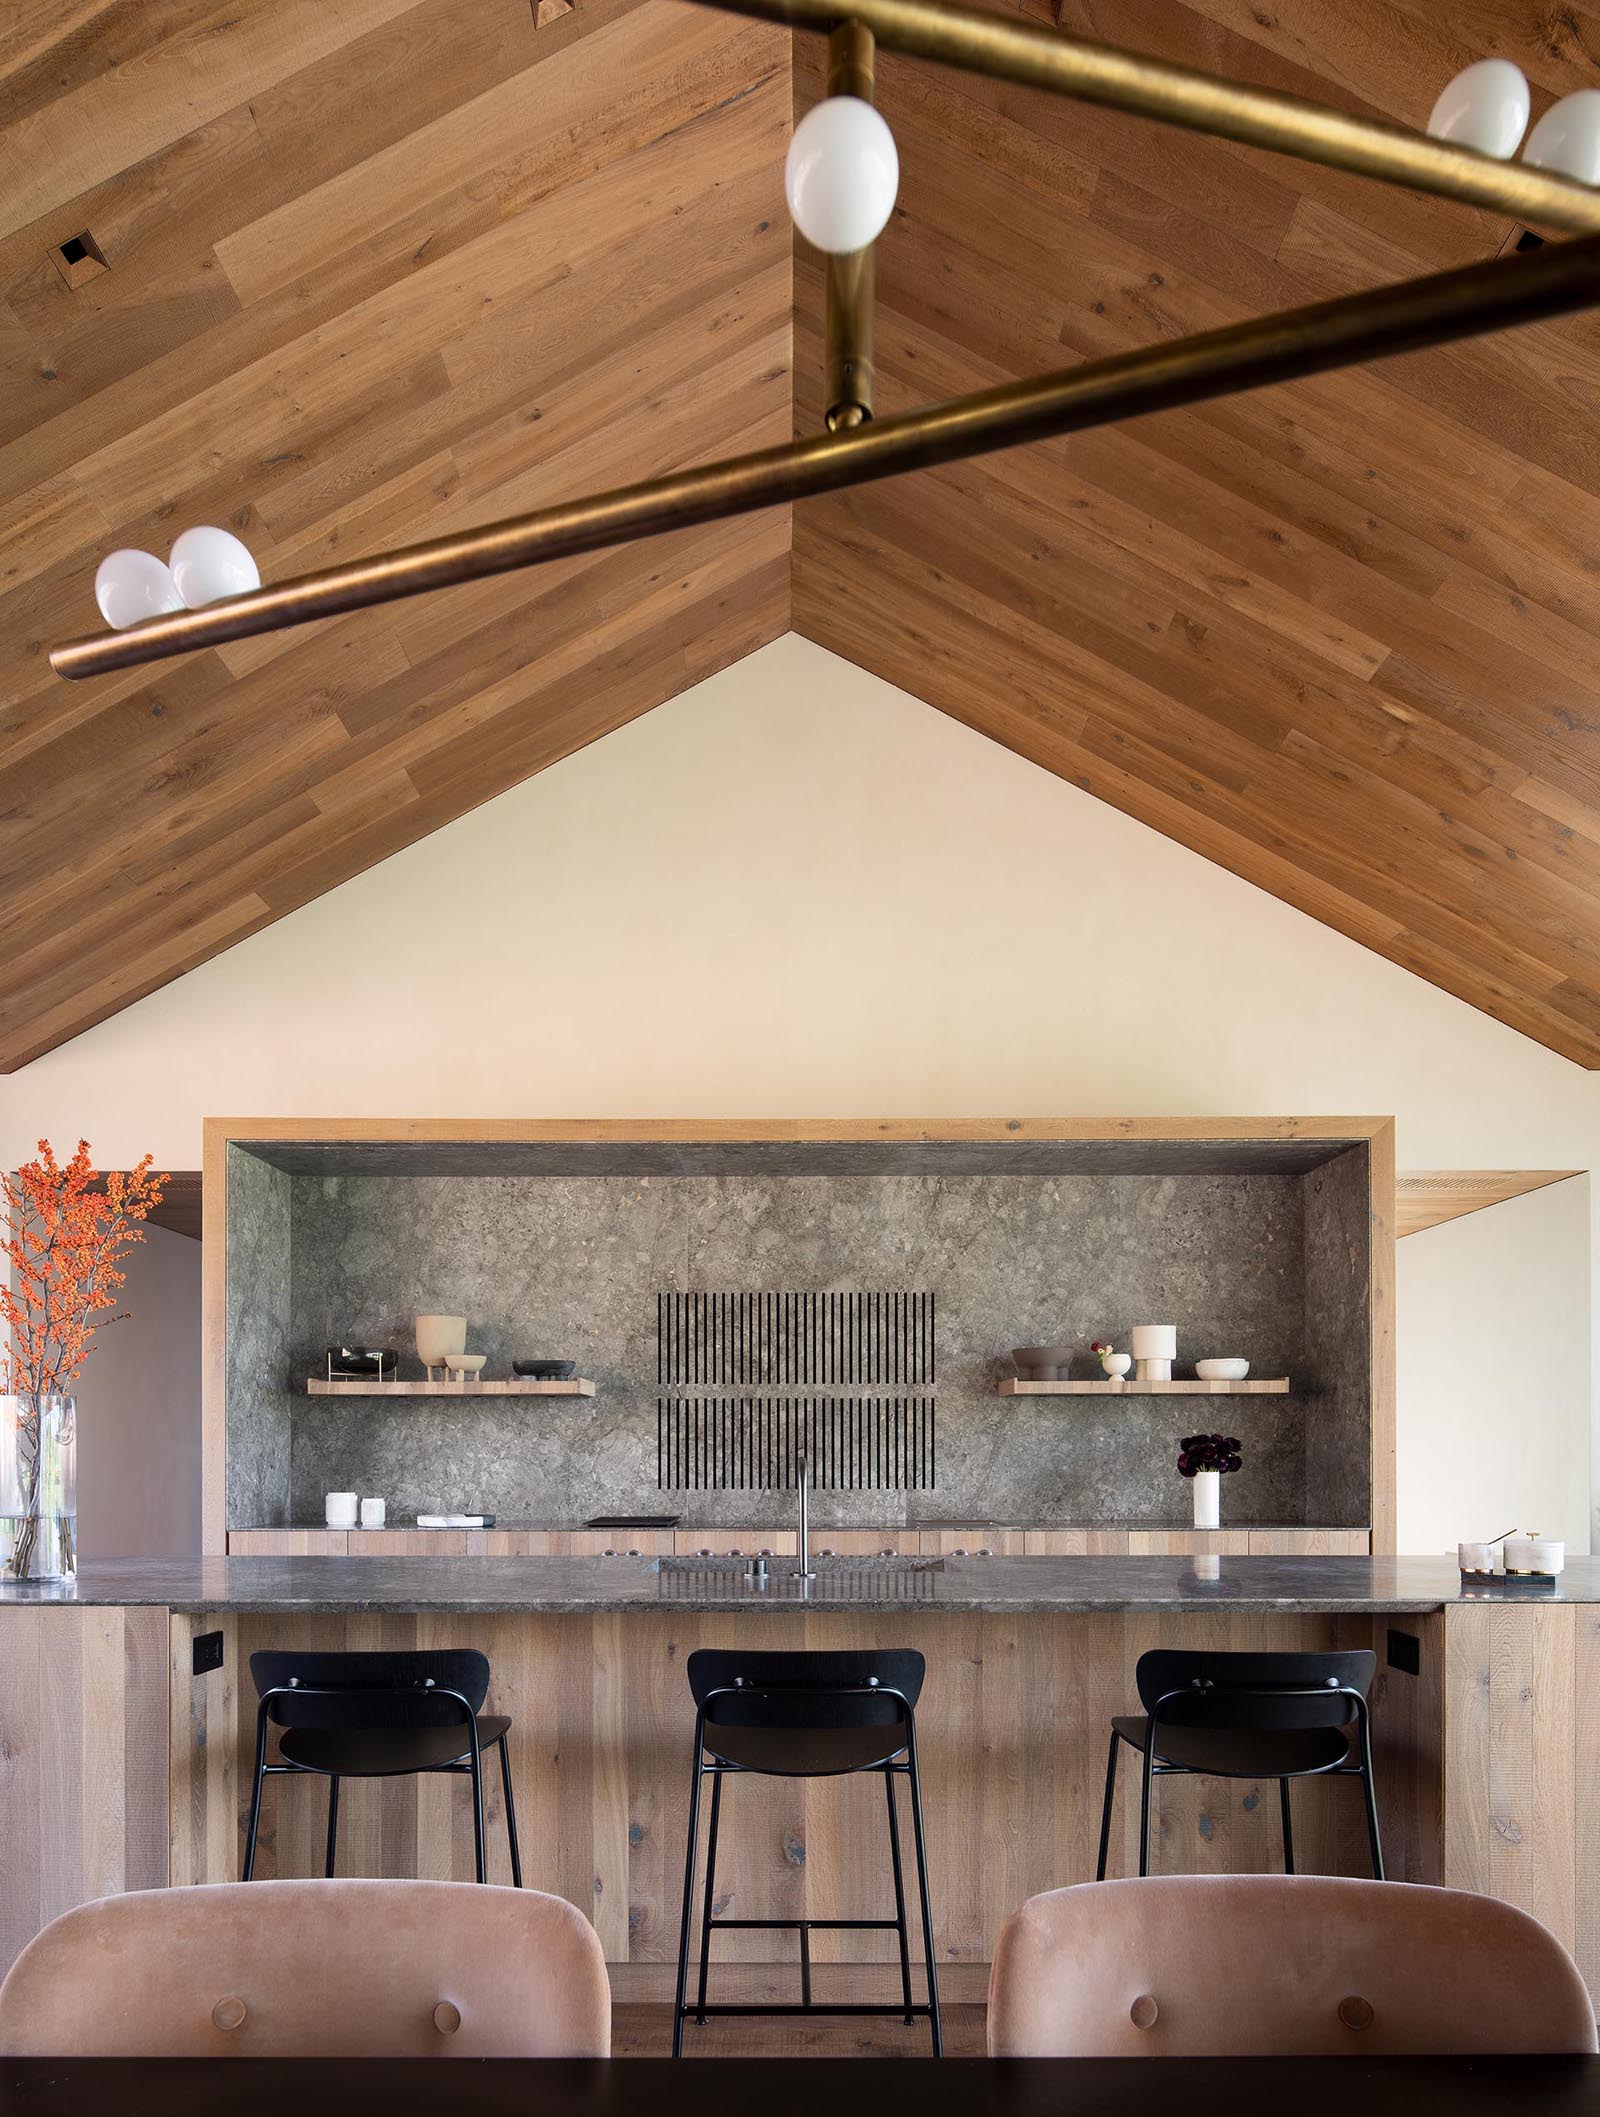 The steep roof pitches allow for high ceilings, while in the kitchen, a gray stone countertop and backsplash complement the light wood cabinets and island.